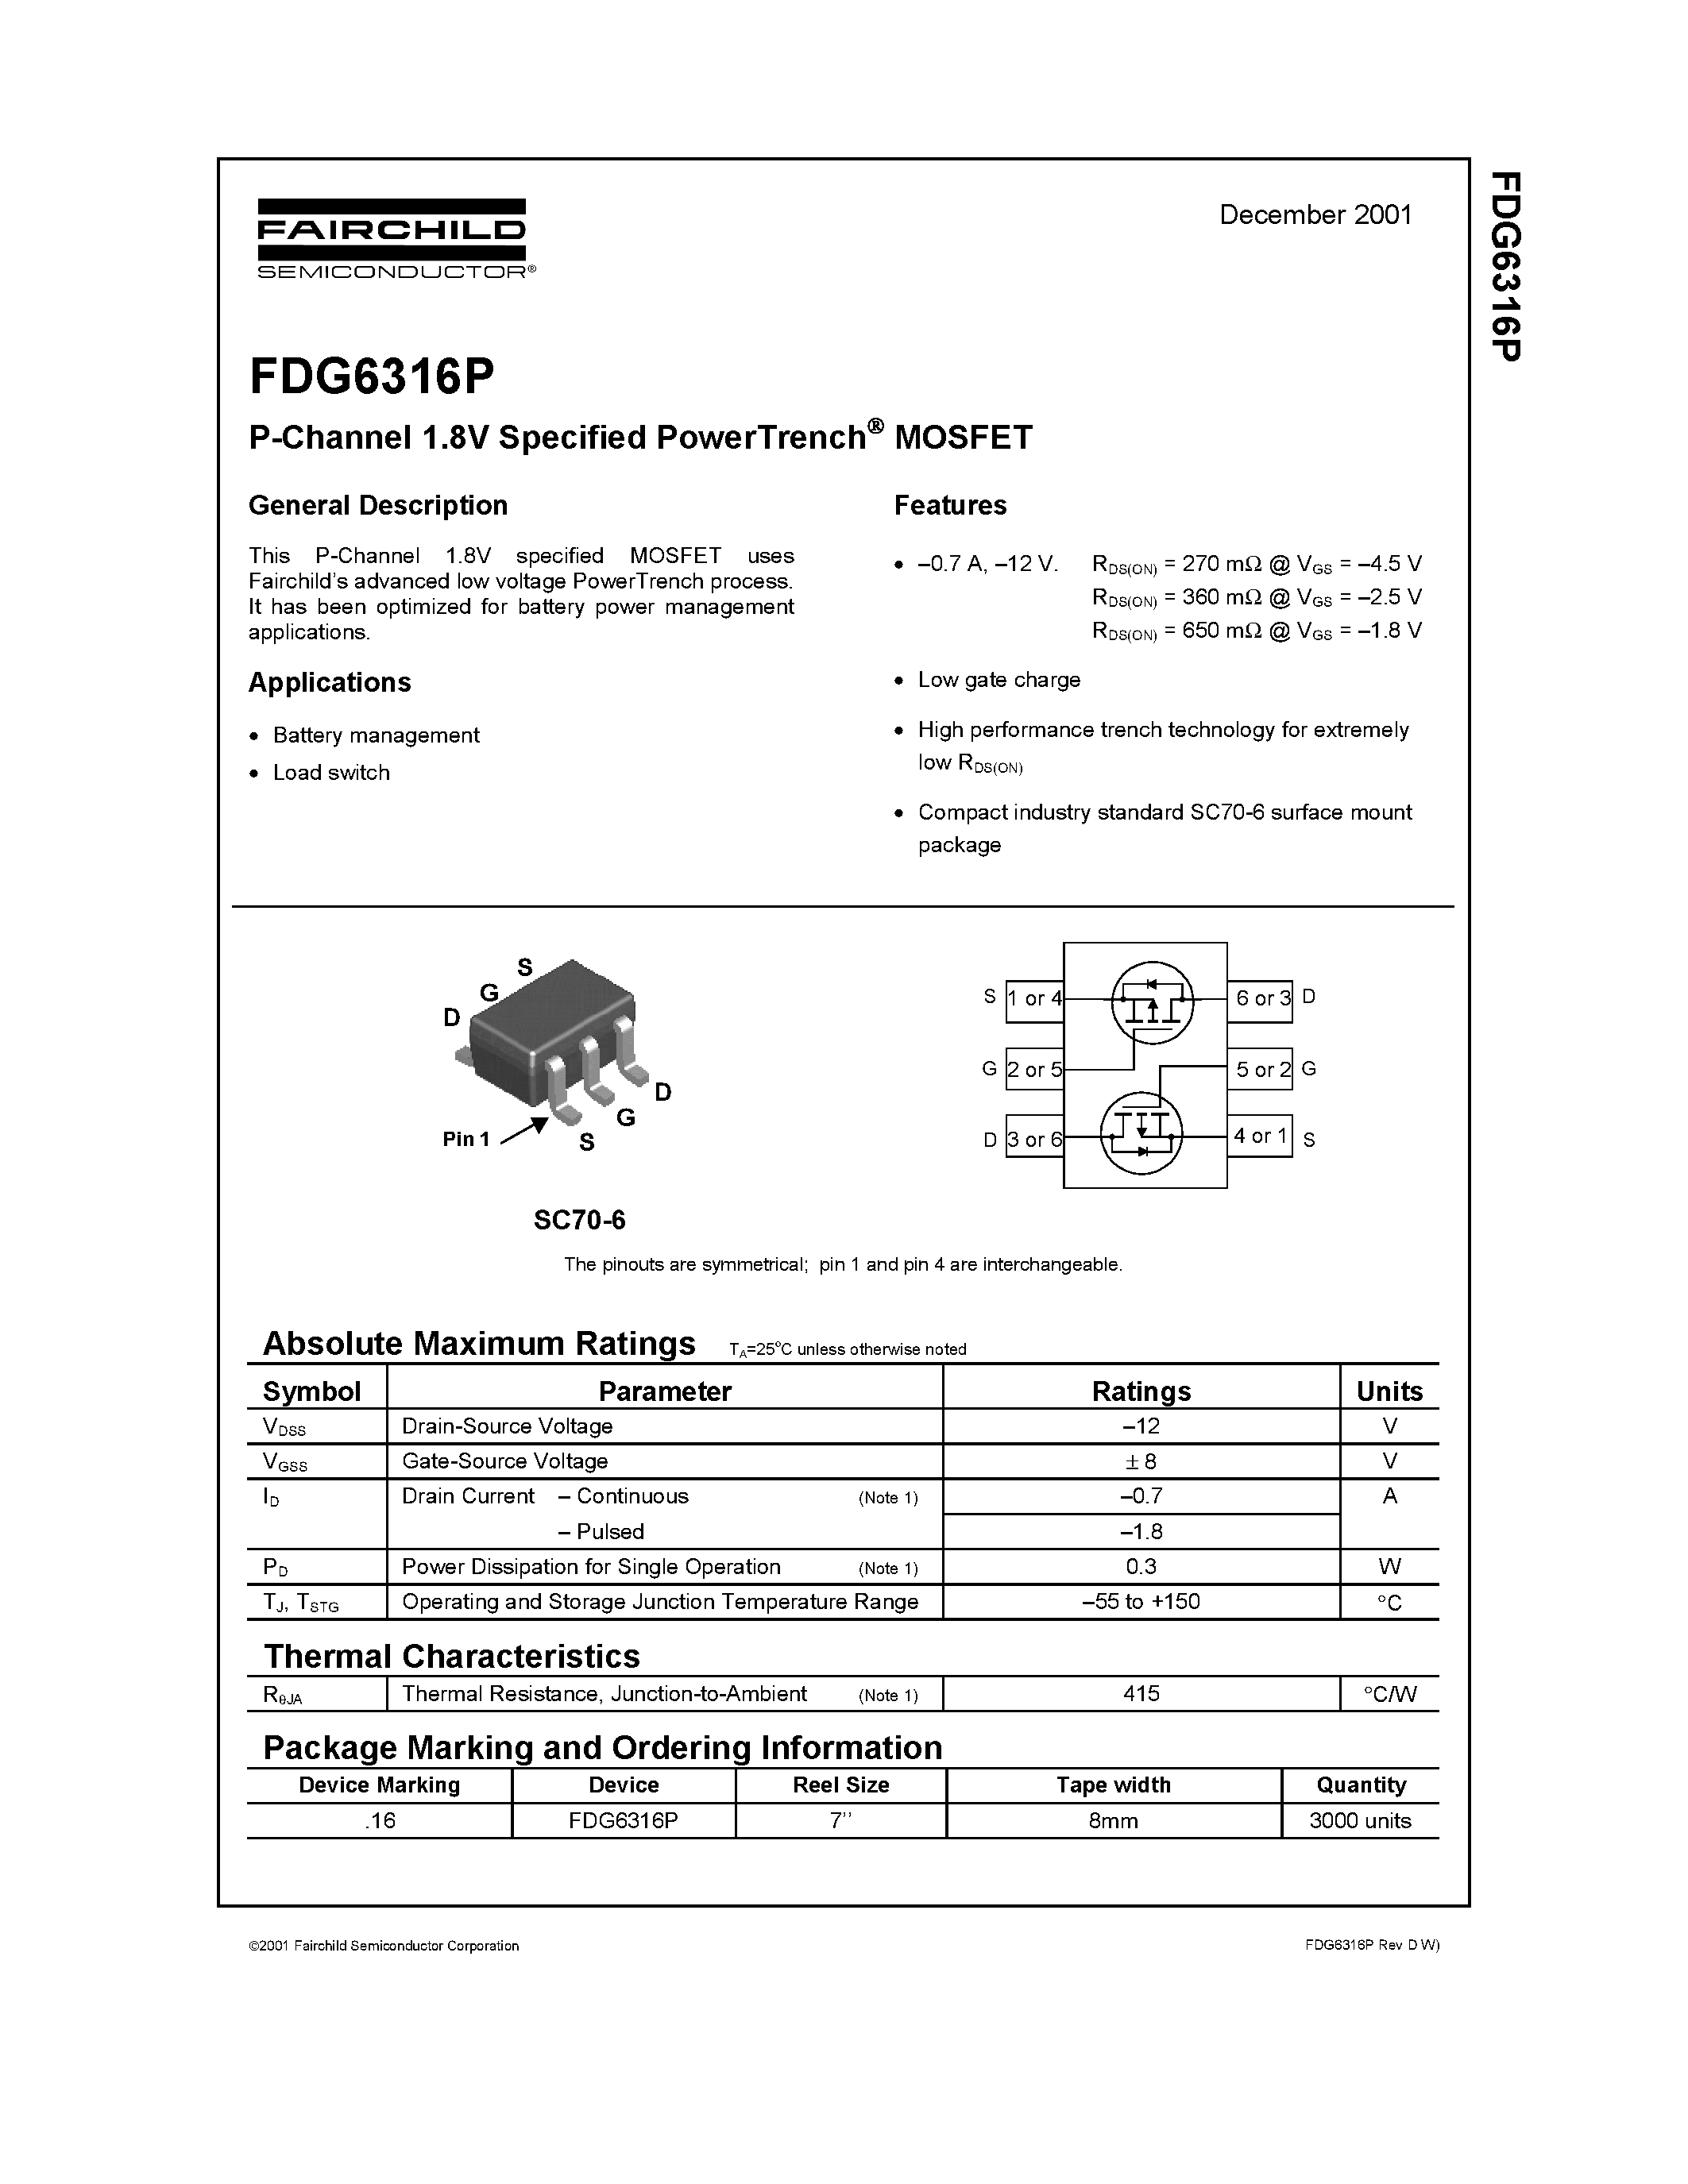 Даташит FDG6316P - P-Channel 1.8V Specified PowerTrench MOSFET страница 1